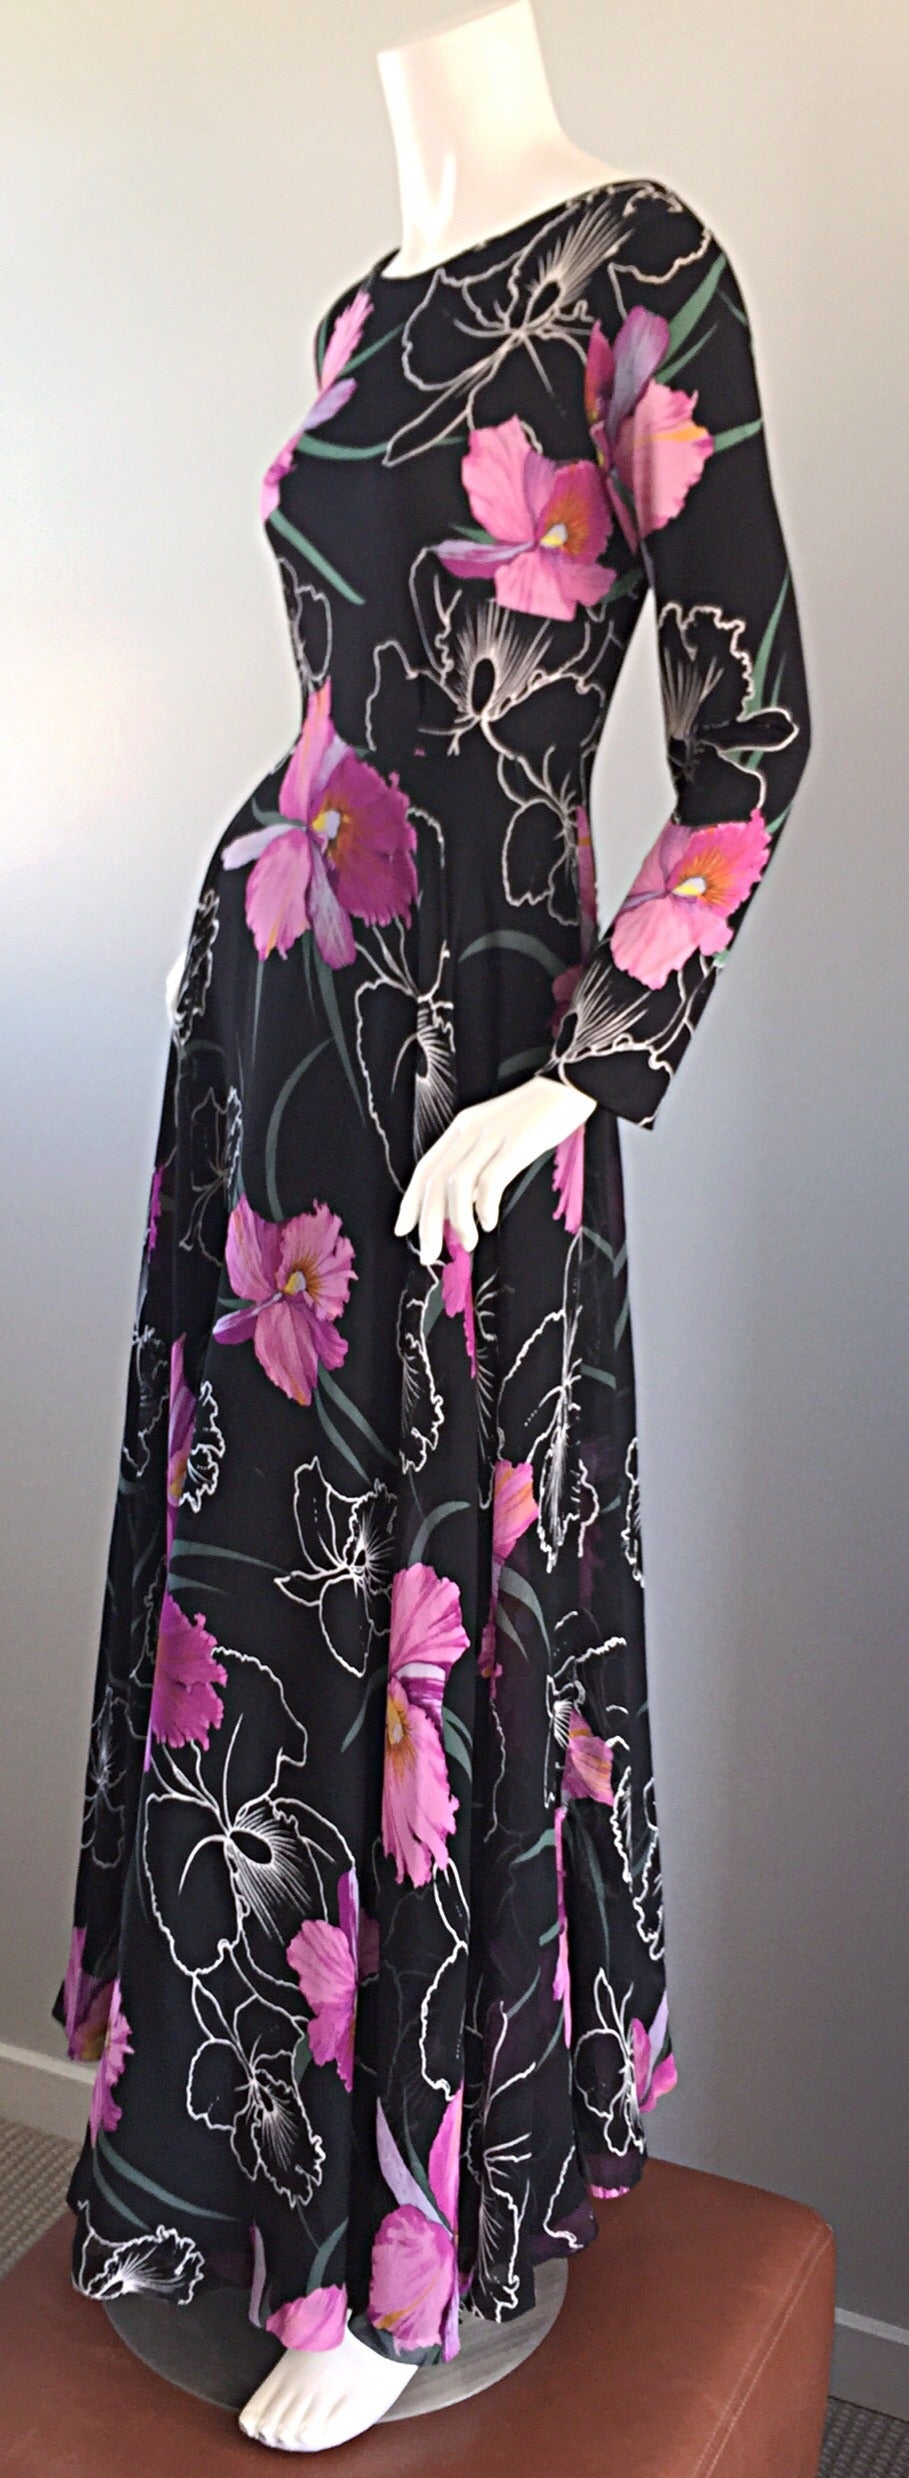 Incredibly beautiful vintage La Mendola silk chiffon dress! Stunning hibiscus floral print throughout, with a somewhat 3-D effect. Layers and layers of fine silk chiffon, with a wonderful full skirt. La Mendola pieces are pristinely constructed, and